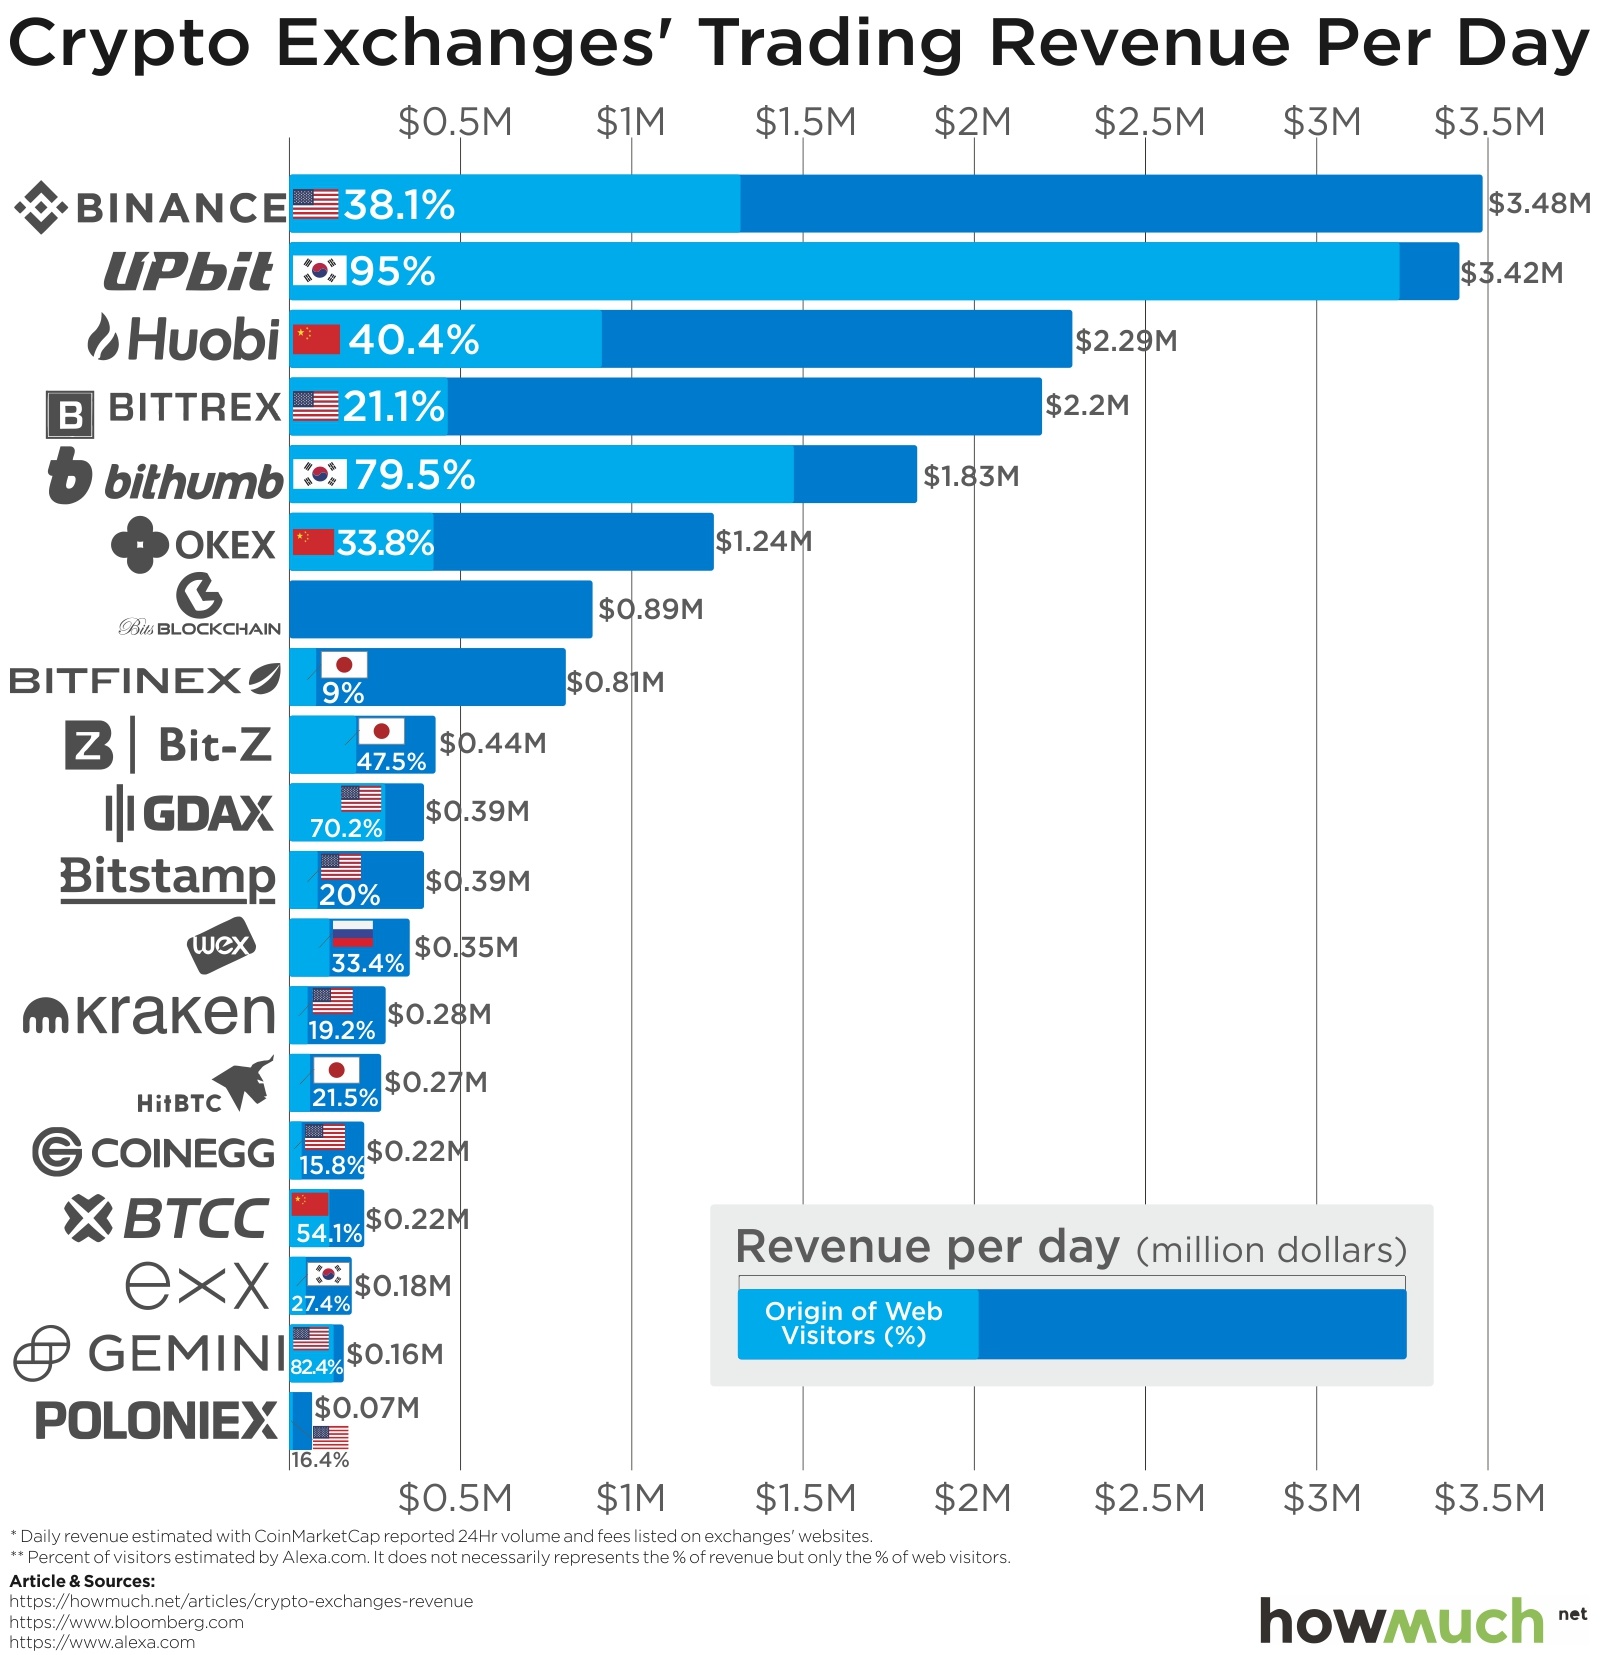 Cryptoradar: Compare the Best Cryptocurrency Exchanges